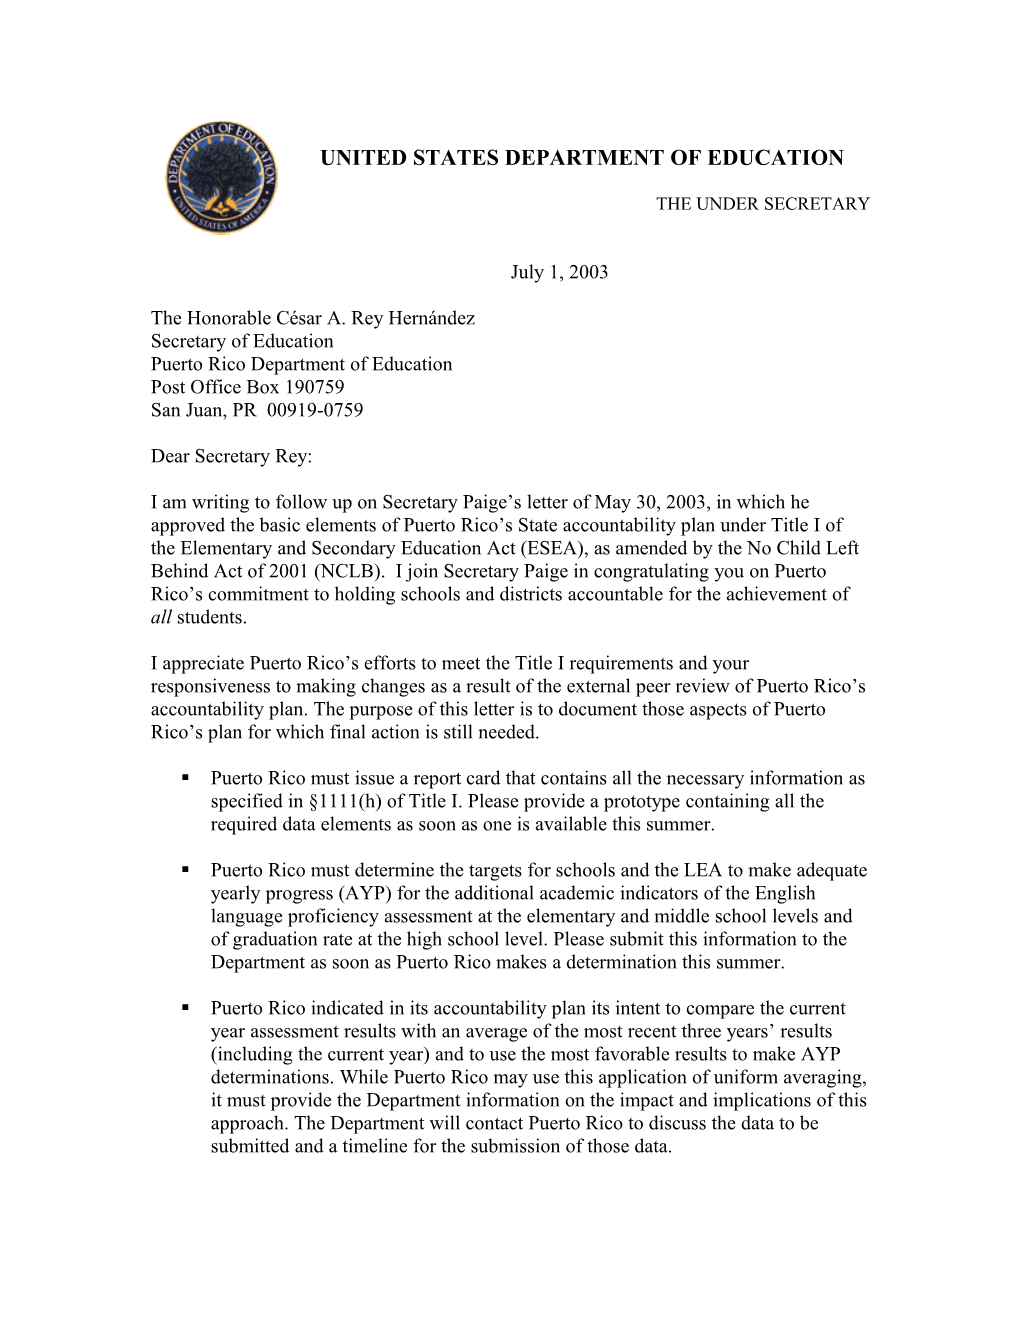 Puerto Rico State Accountability Plan Decision Letter (MS WORD)